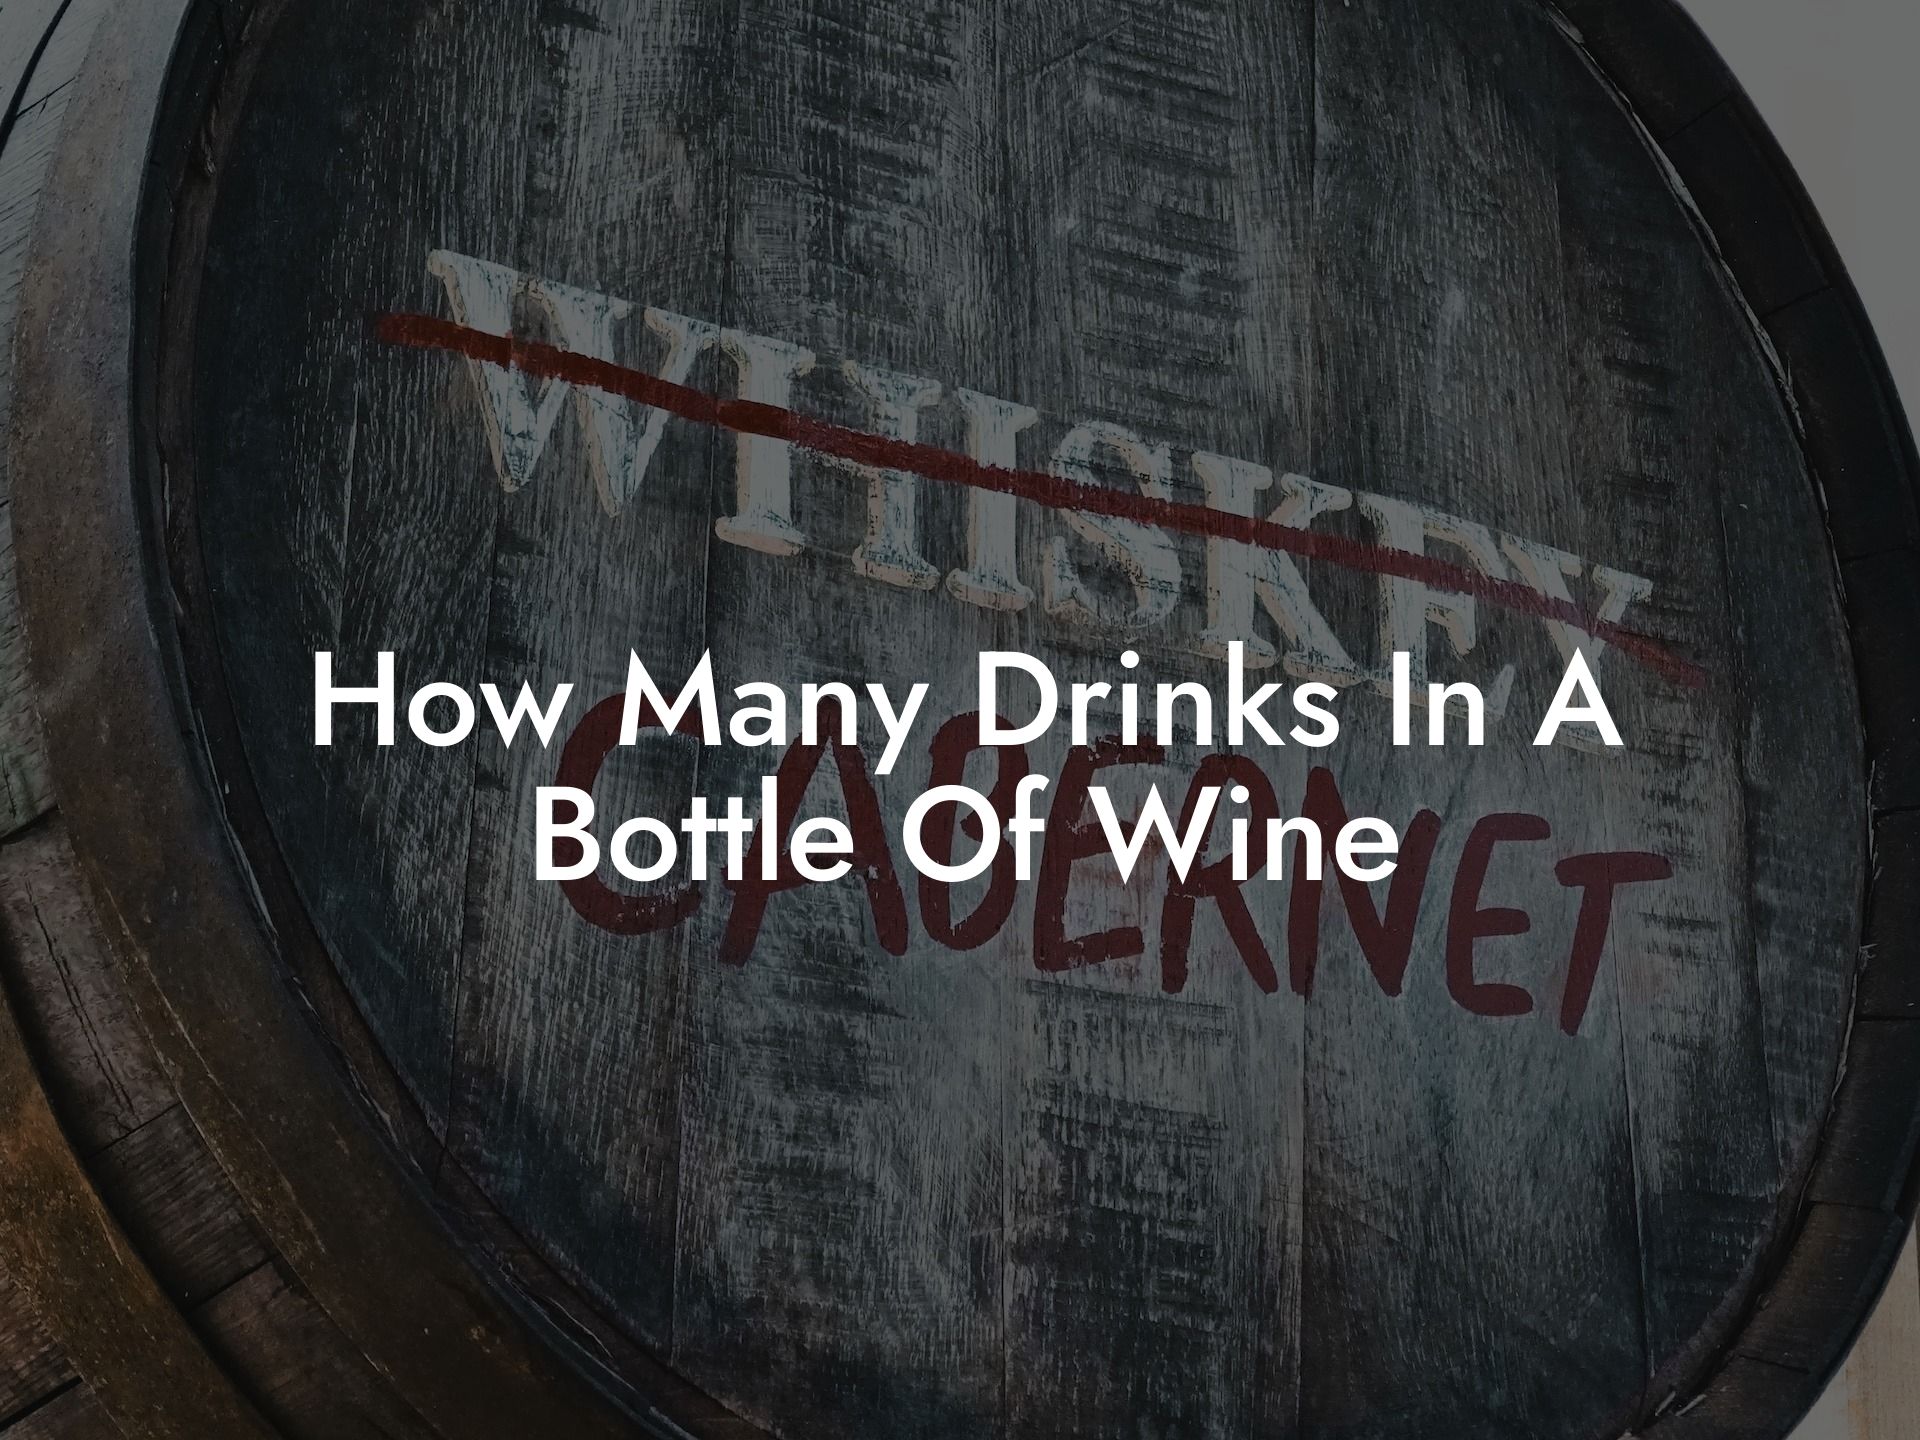 How Many Drinks In A Bottle Of Wine